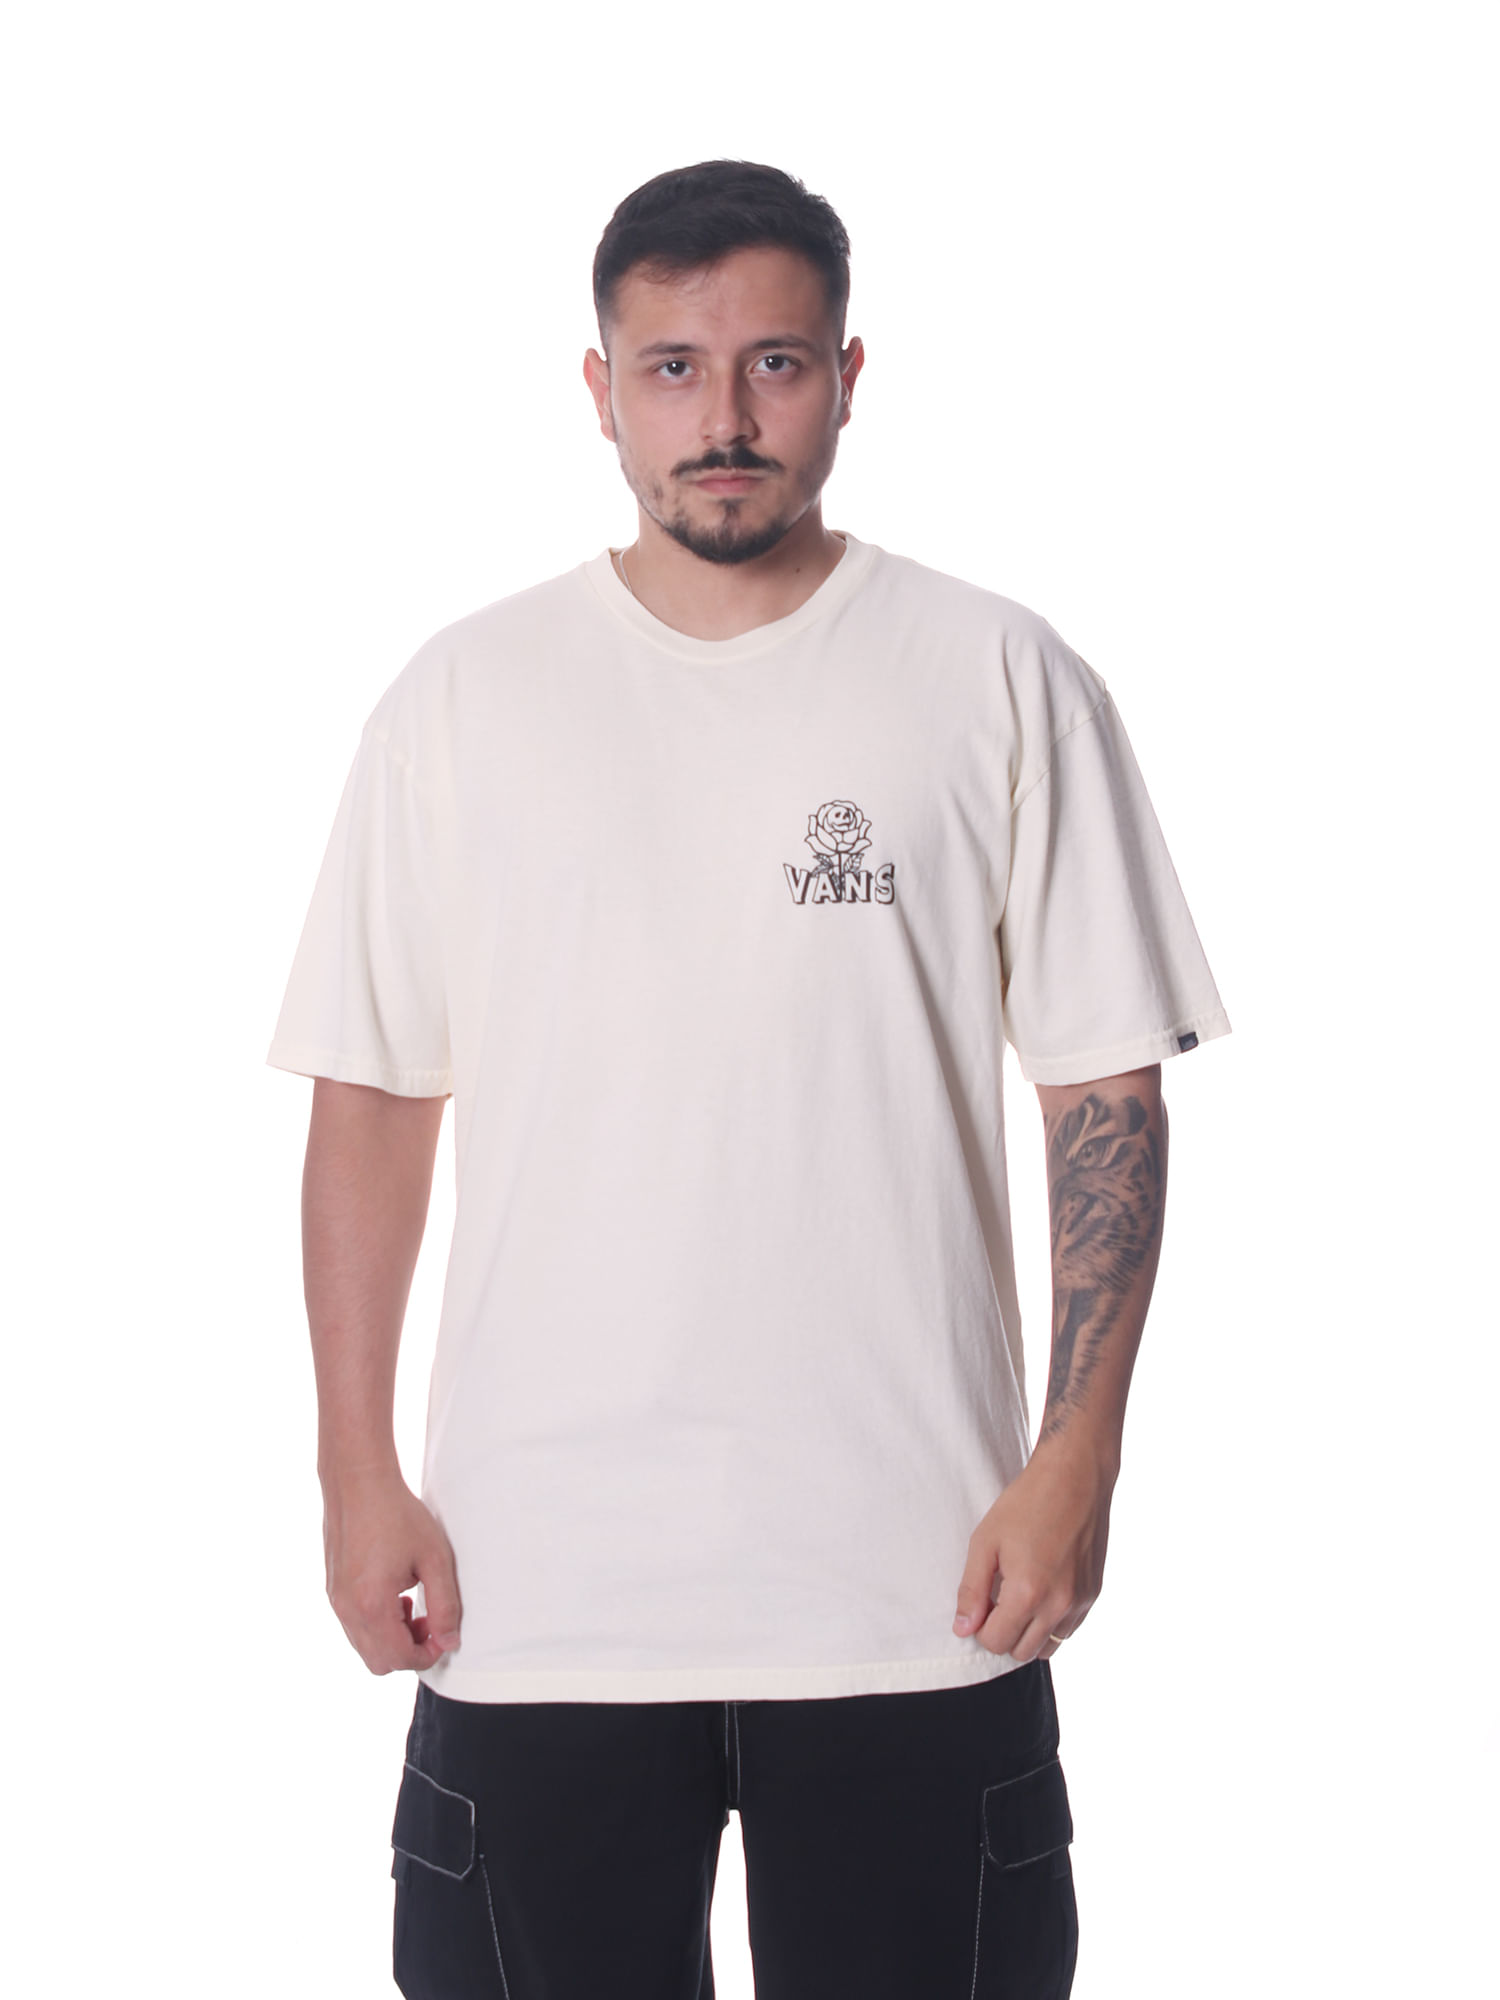 Camiseta-vans-off-the-wall-social-club-Off-white